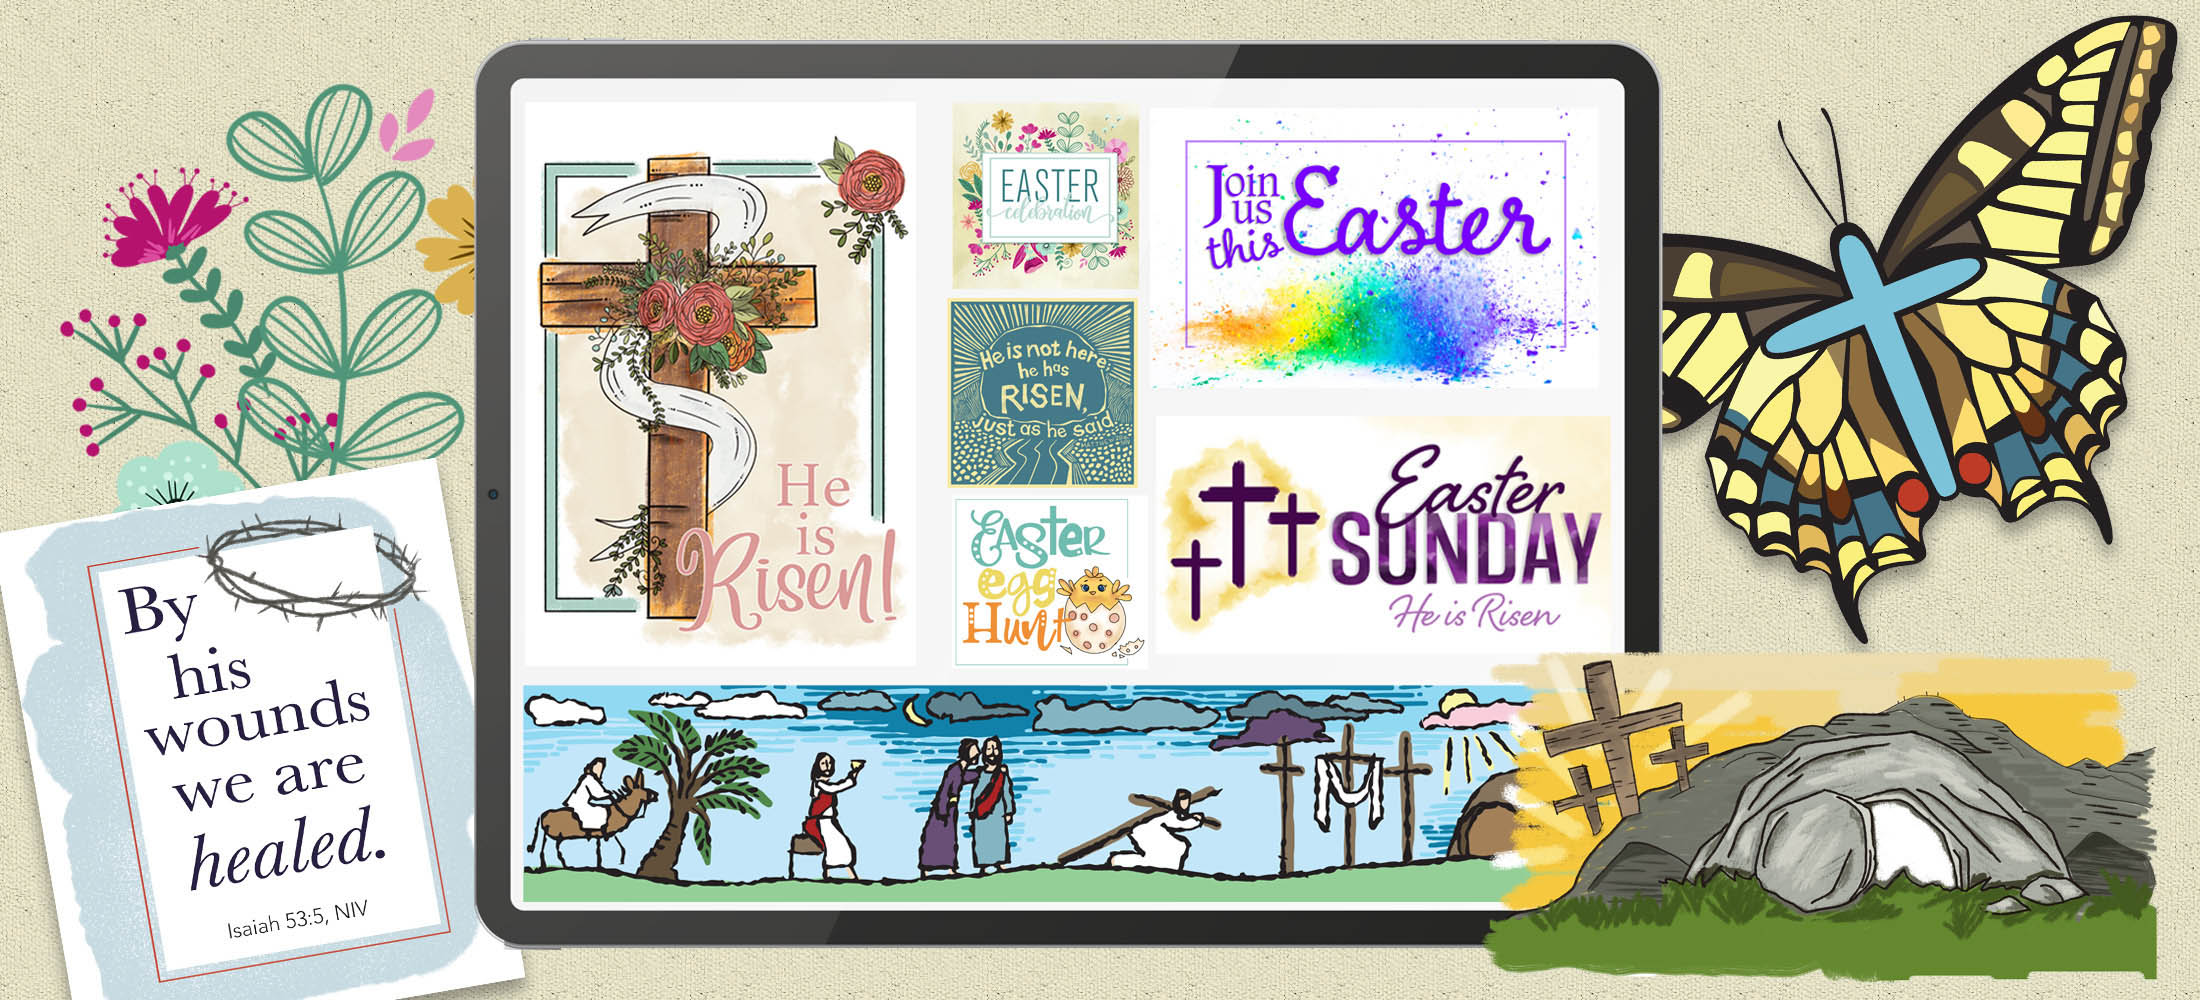 Easter religious images for church publication needs